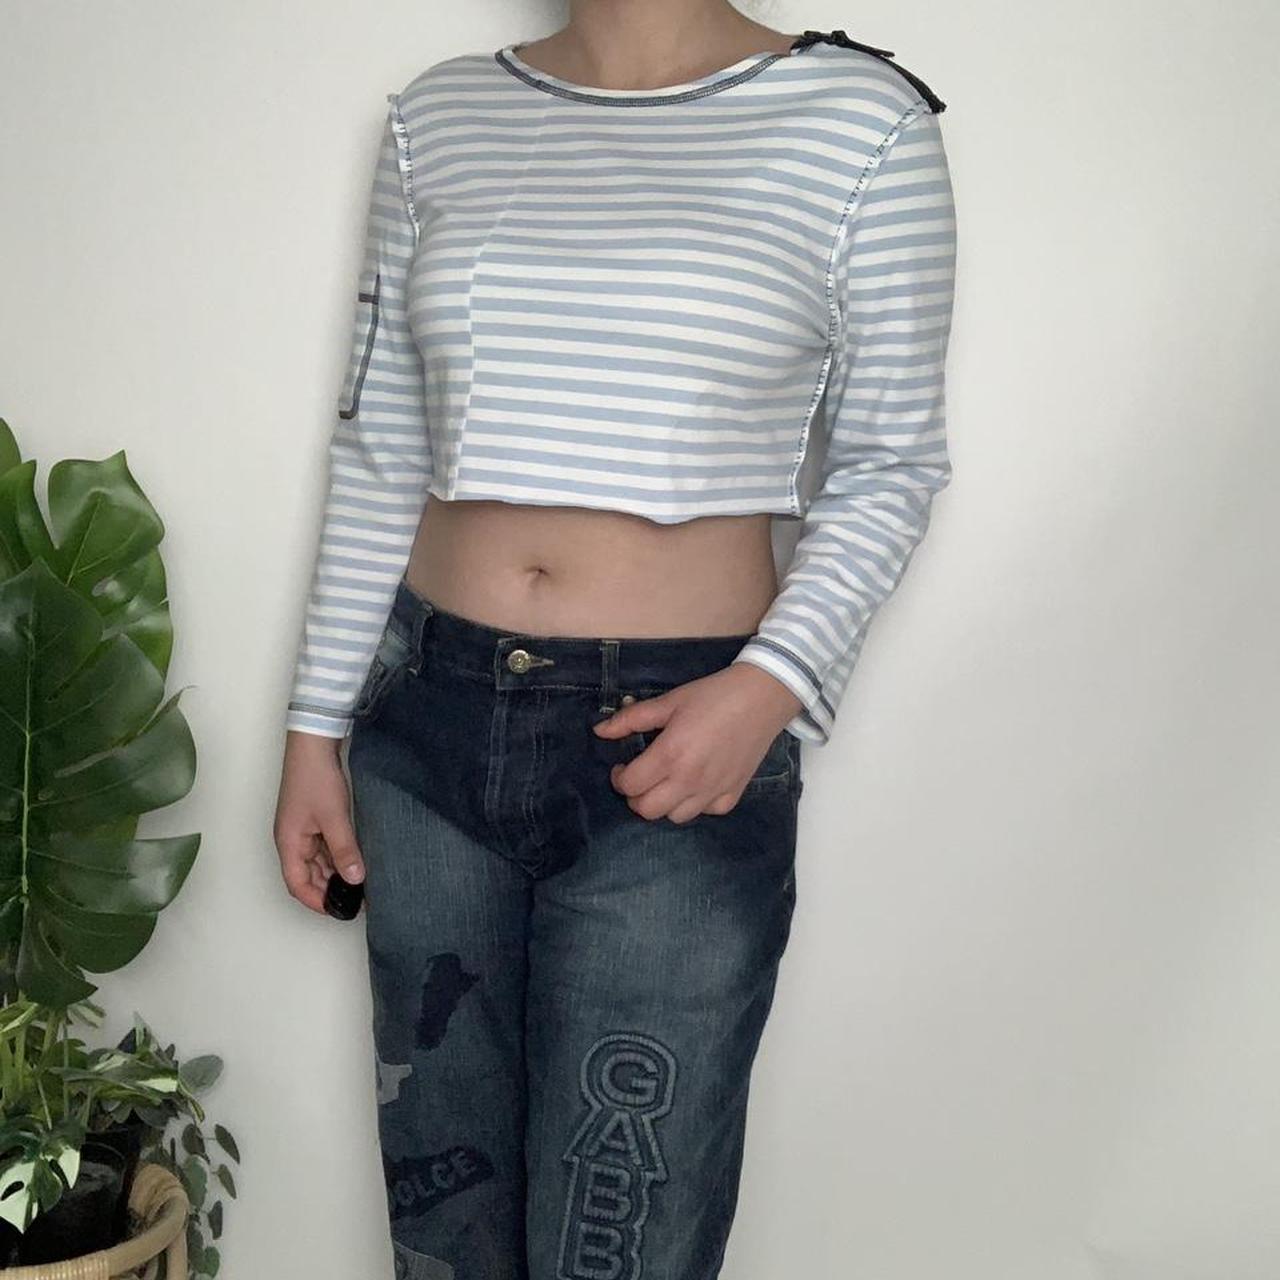 SUMMER STREETS vintage 90s Armani Jeans striped crop top